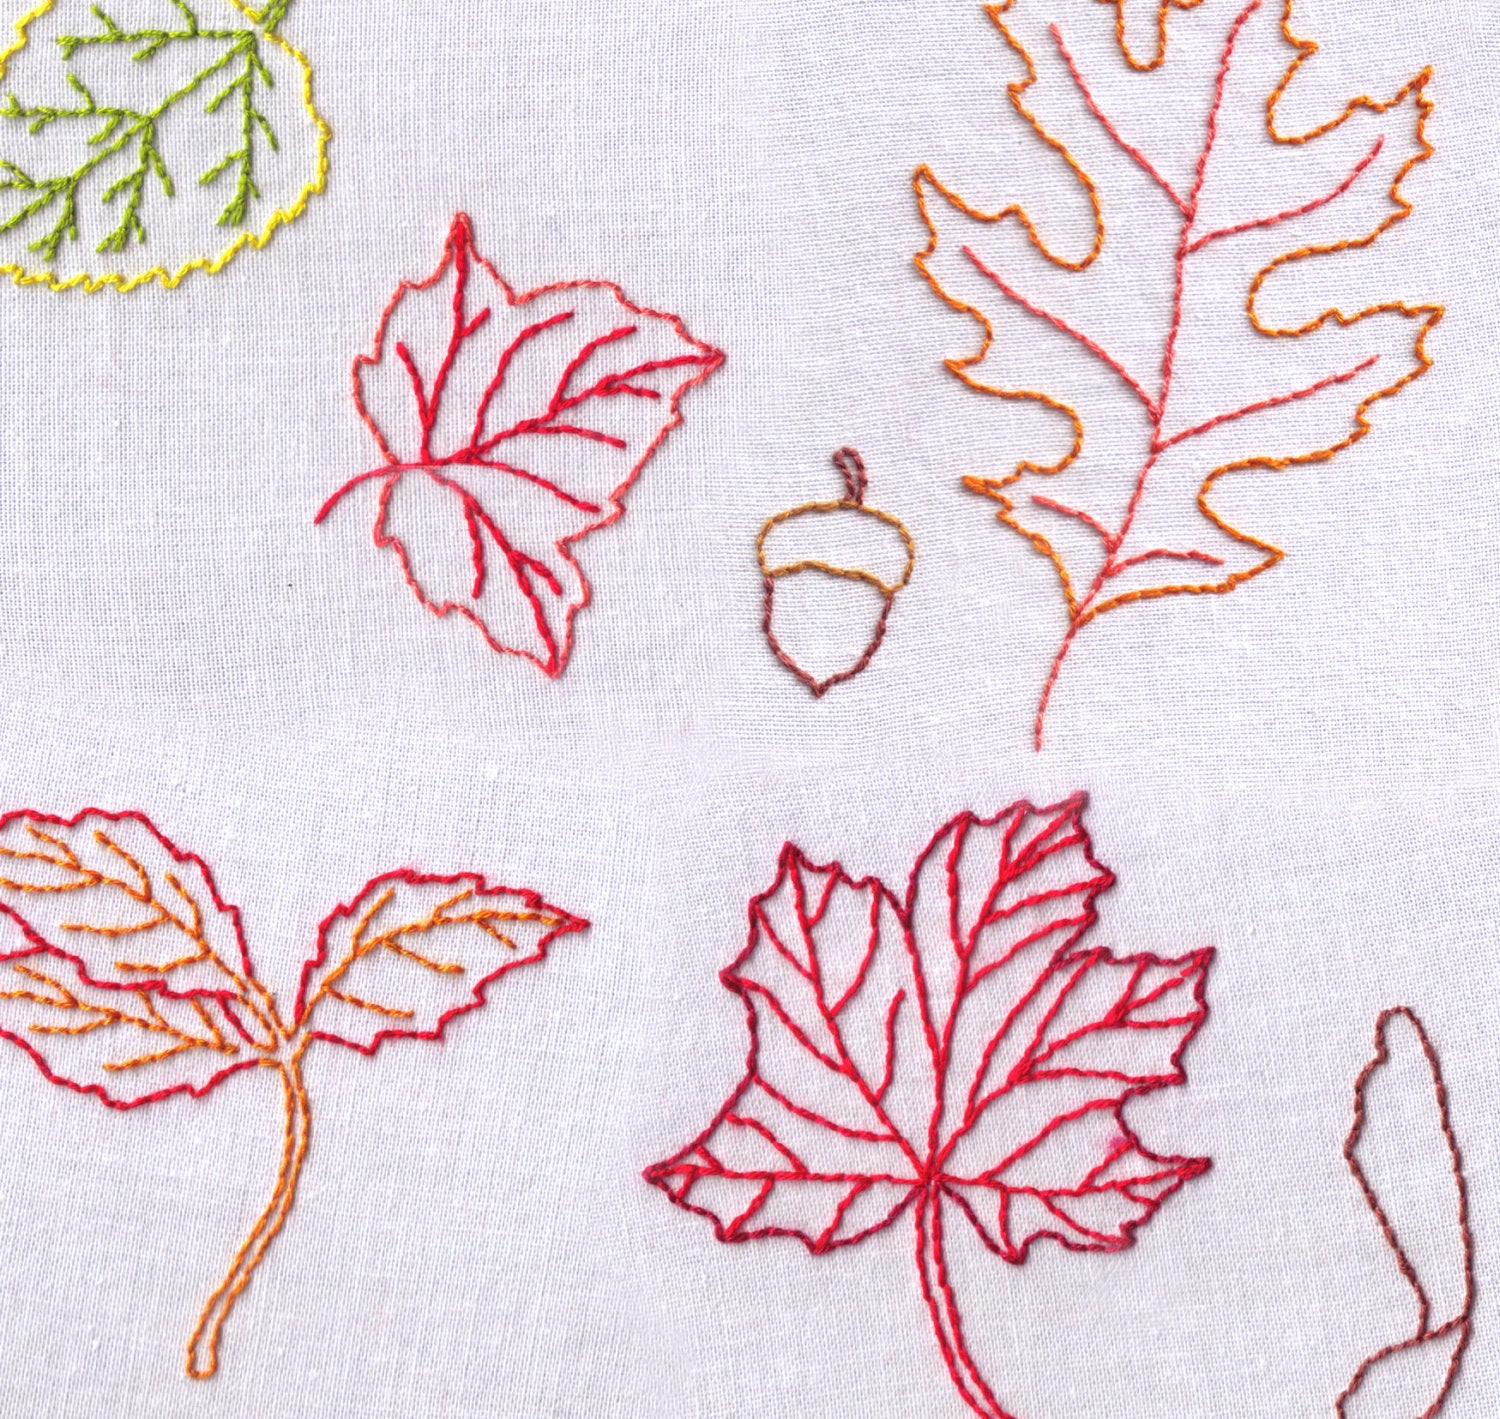 Handkerchief Embroidery Patterns Leaves Hand Embroidery Pattern Fall Autumn Foliage Pdf